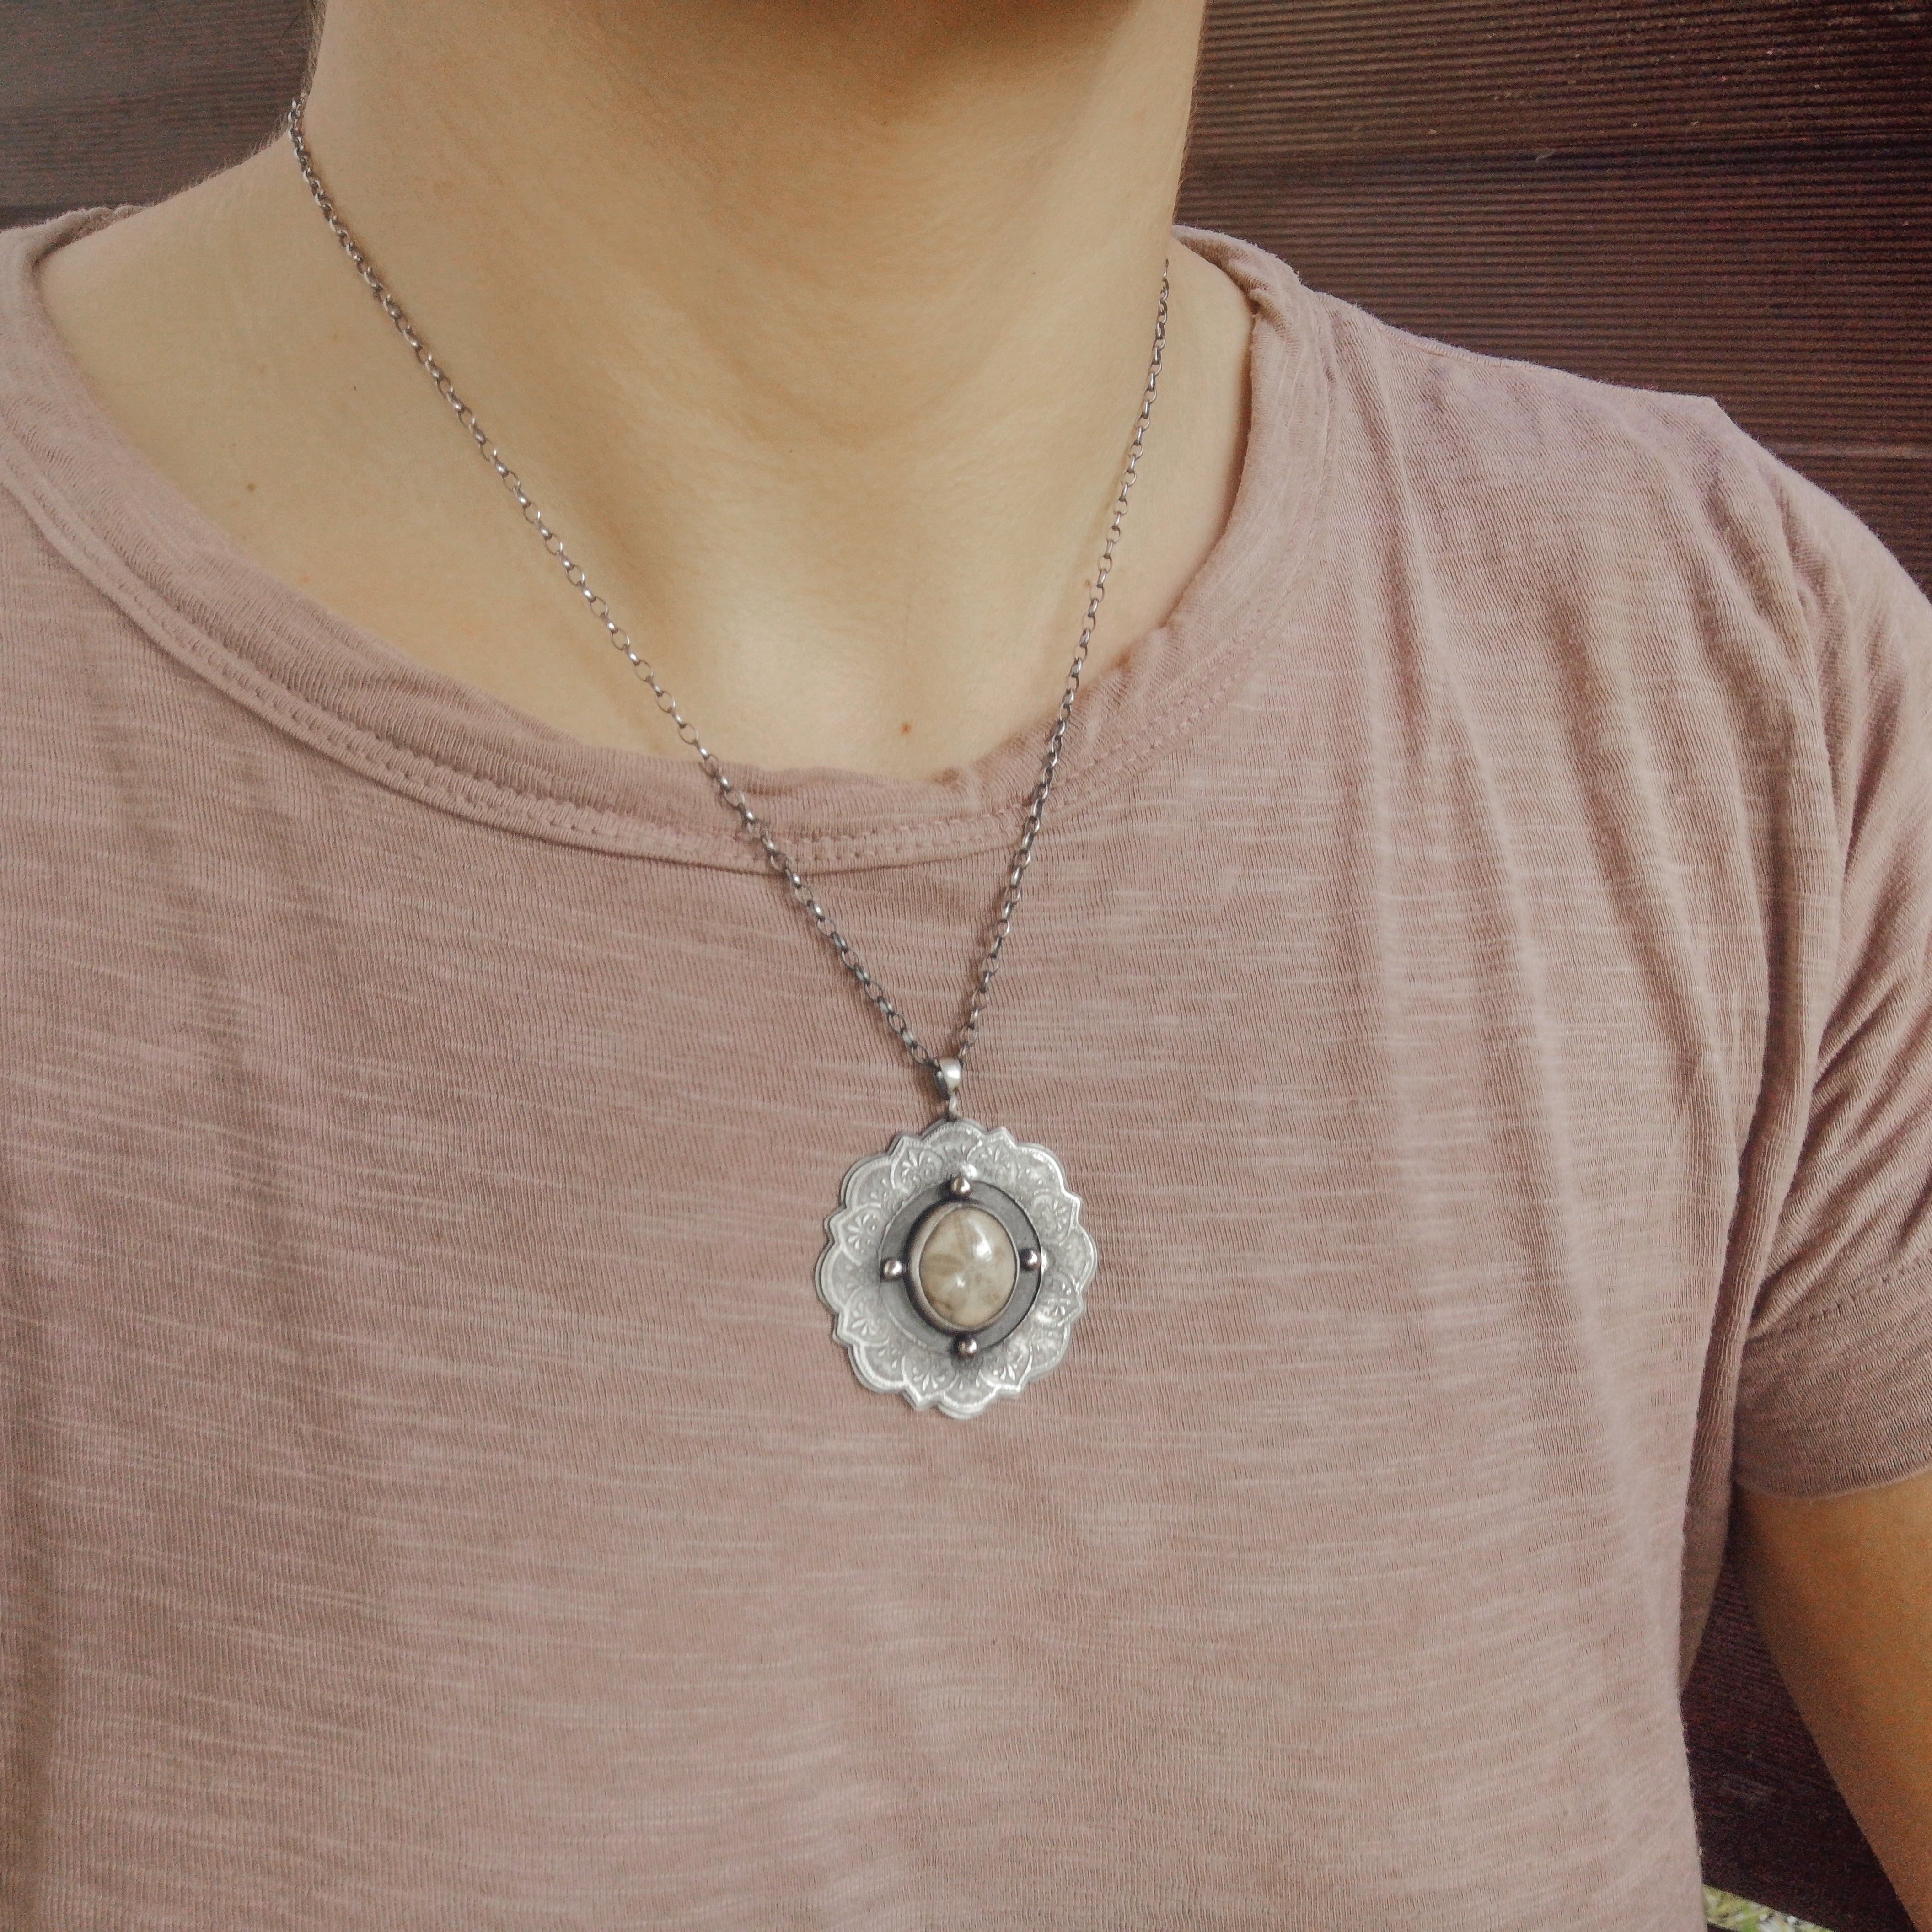 The Mandala & Sea Biscuit Necklace I